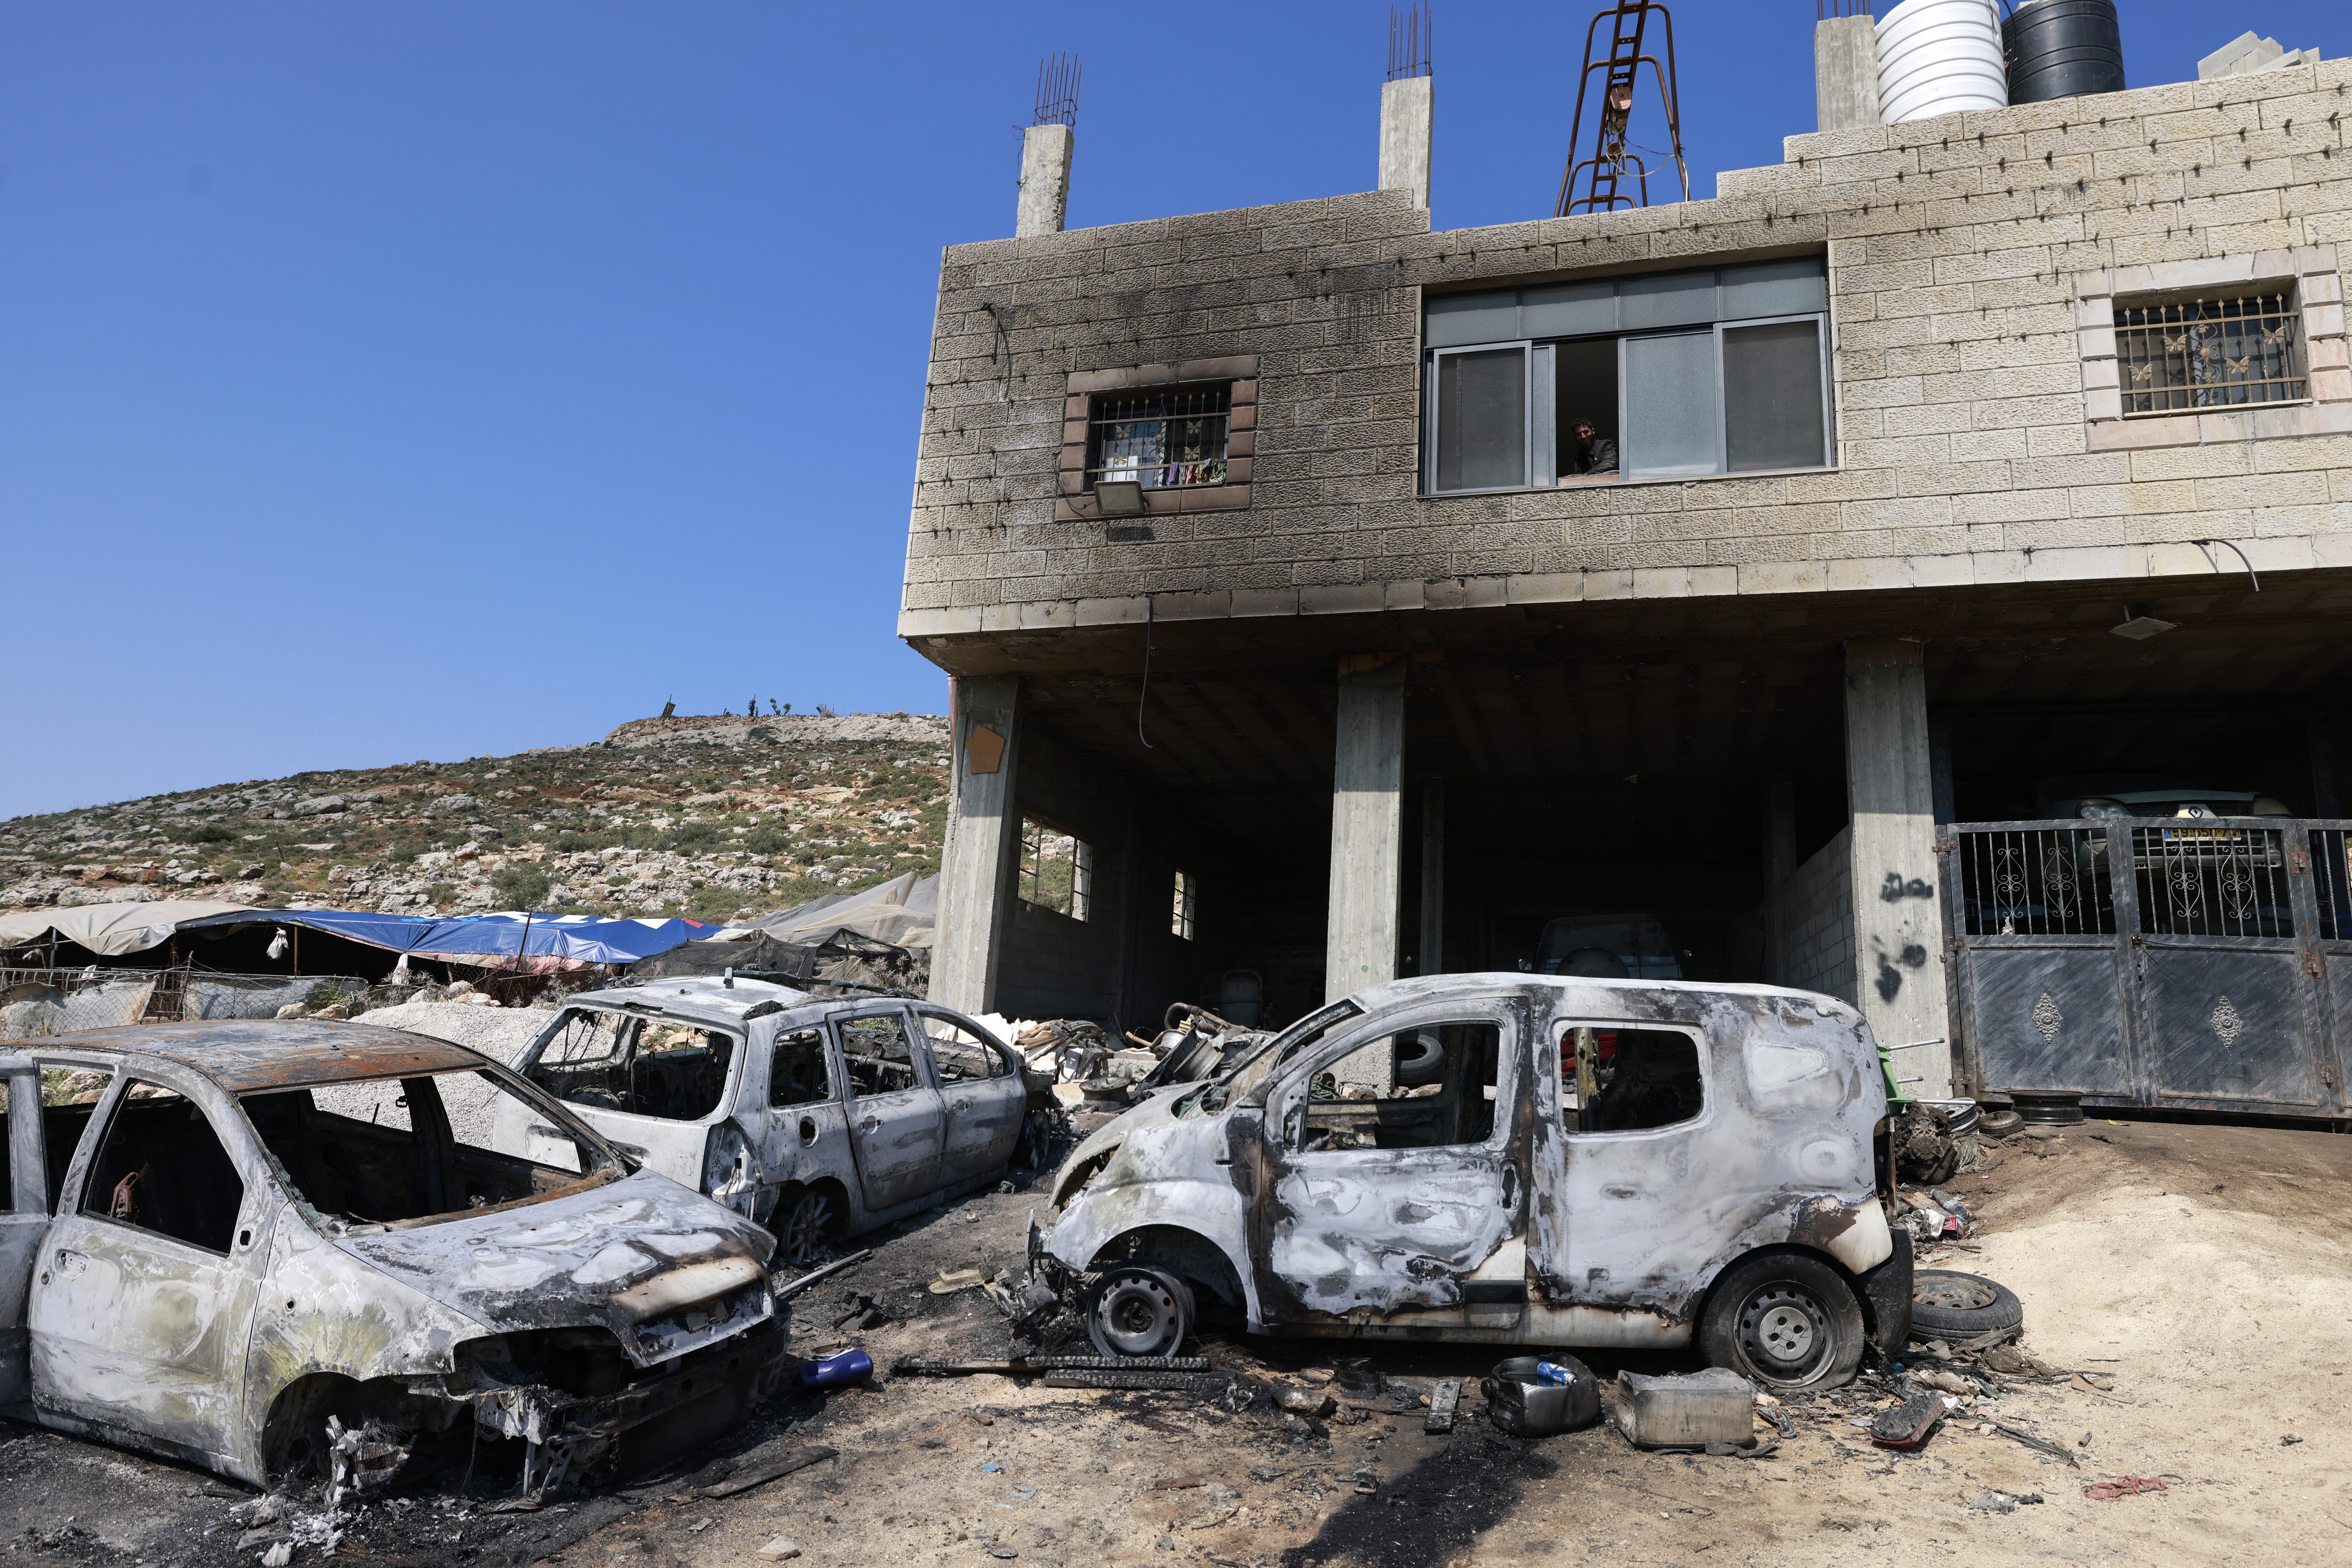 Burned cars are seen in the Palestinian village of Al-Mughayyir in the occupied West Bank, on April 13. 